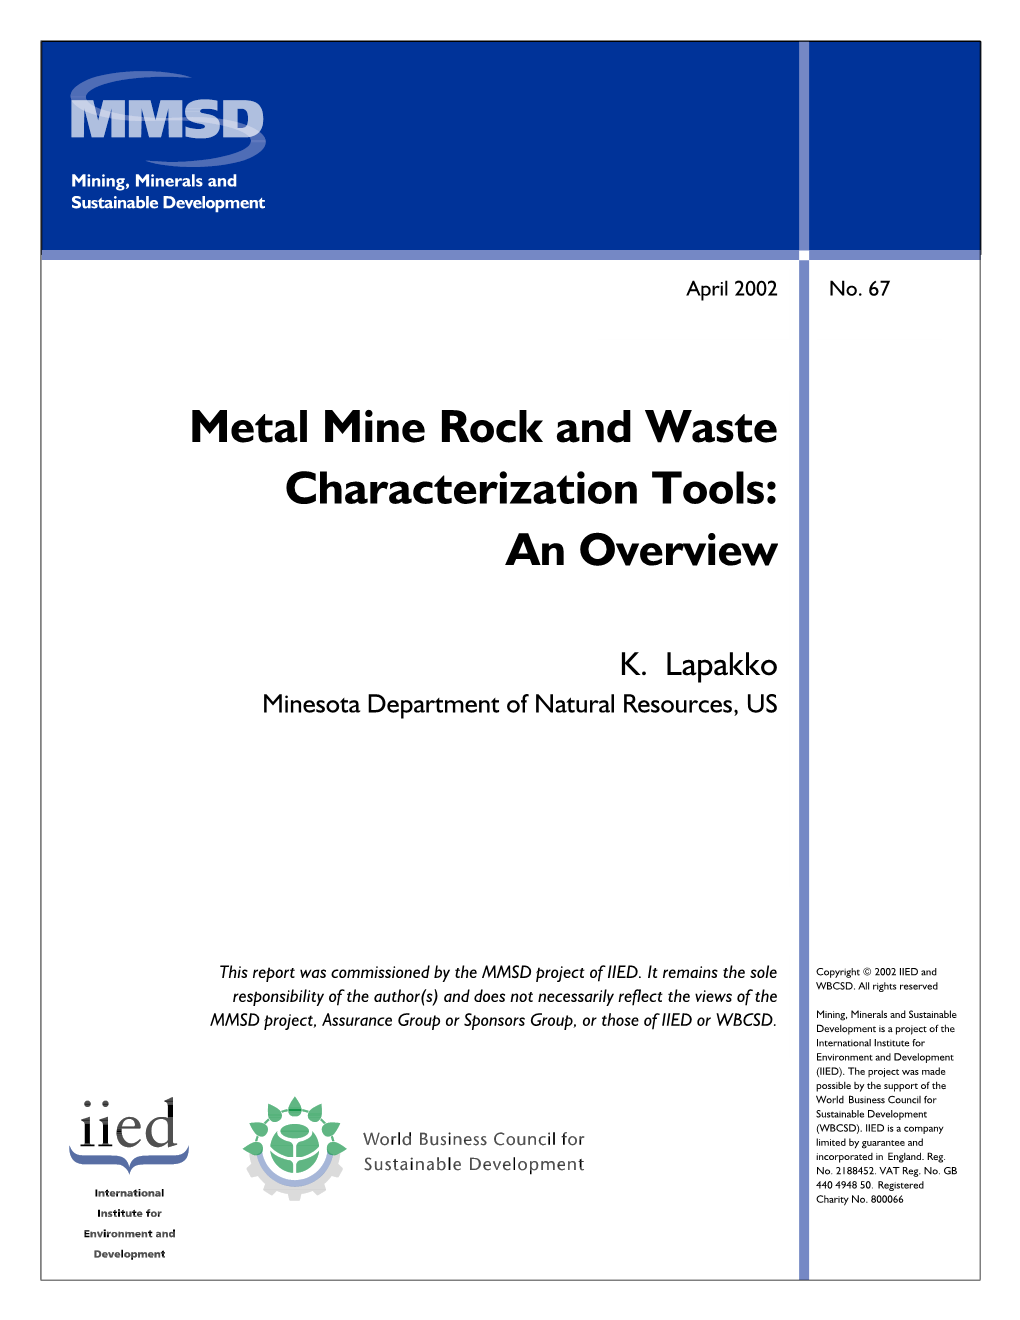 Metal Mine Rock and Waste Characterization Tools: an Overview